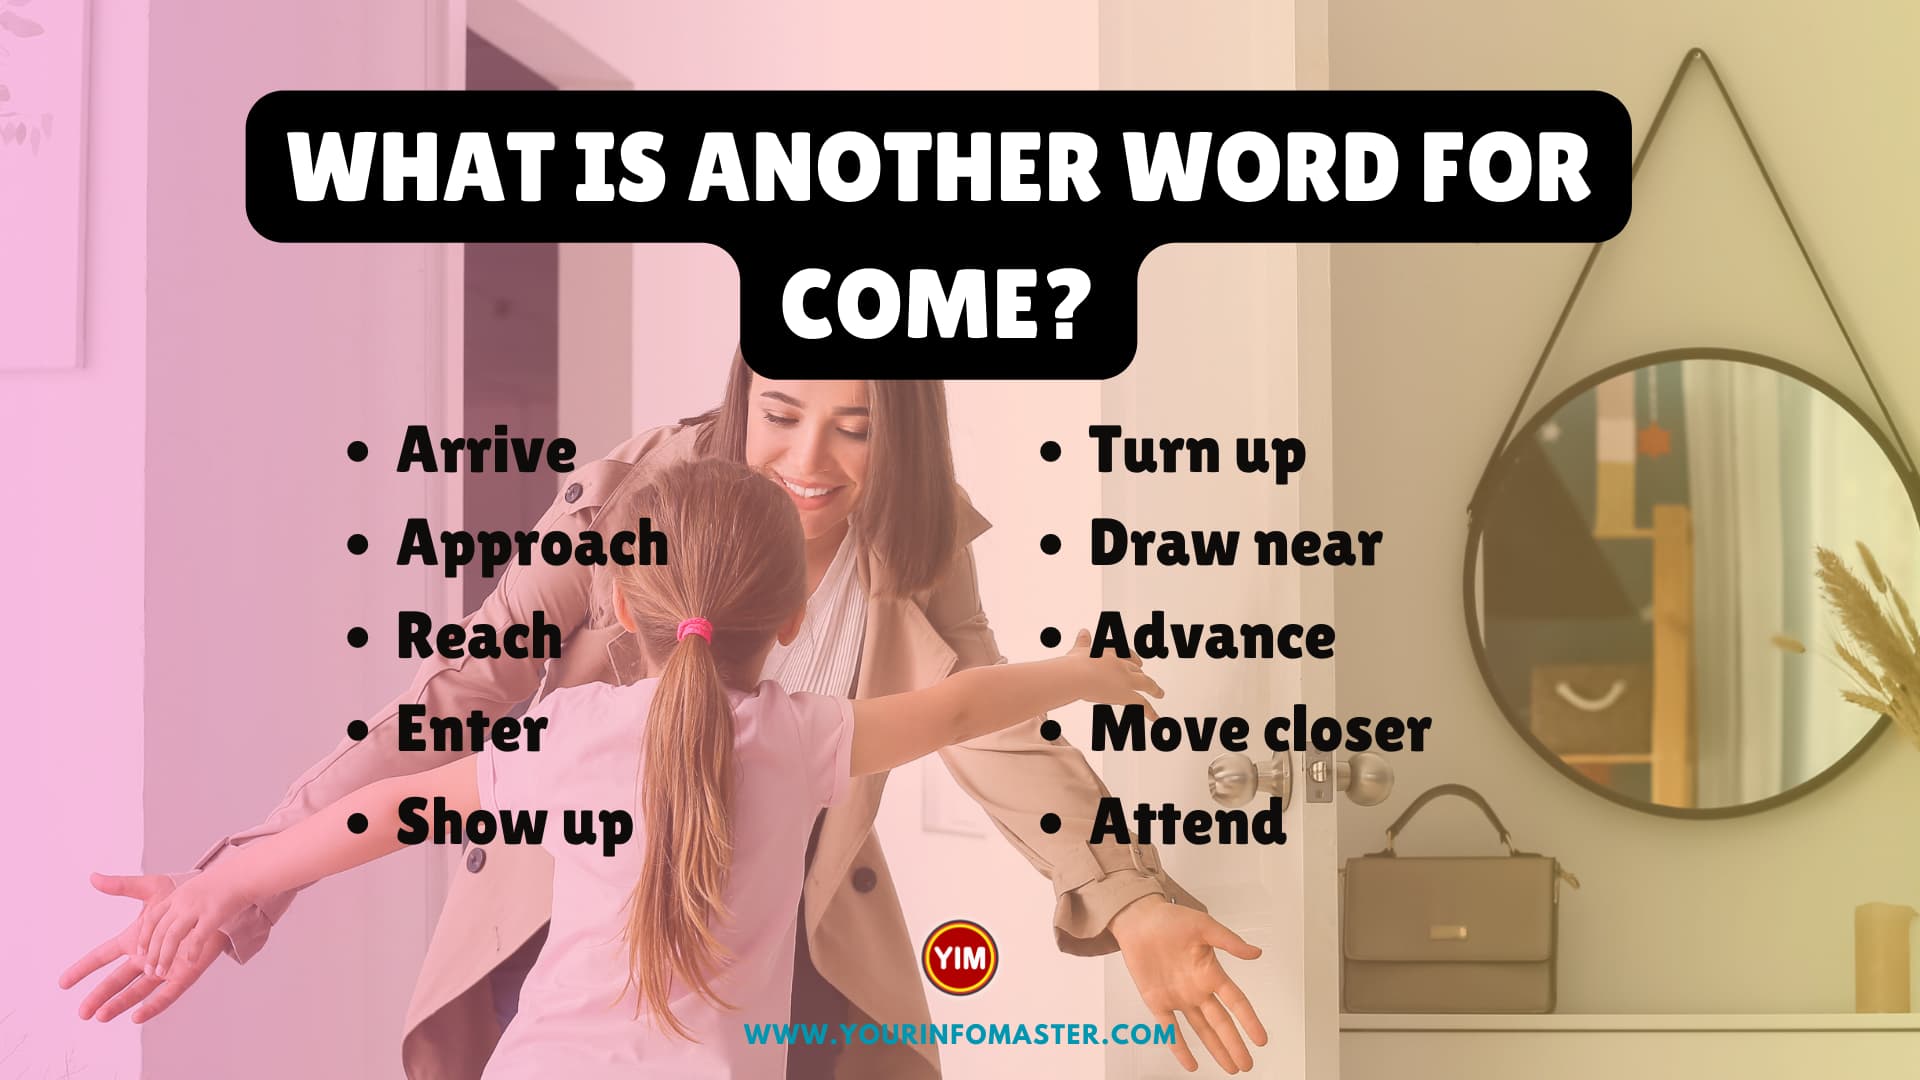 What is another word for Come